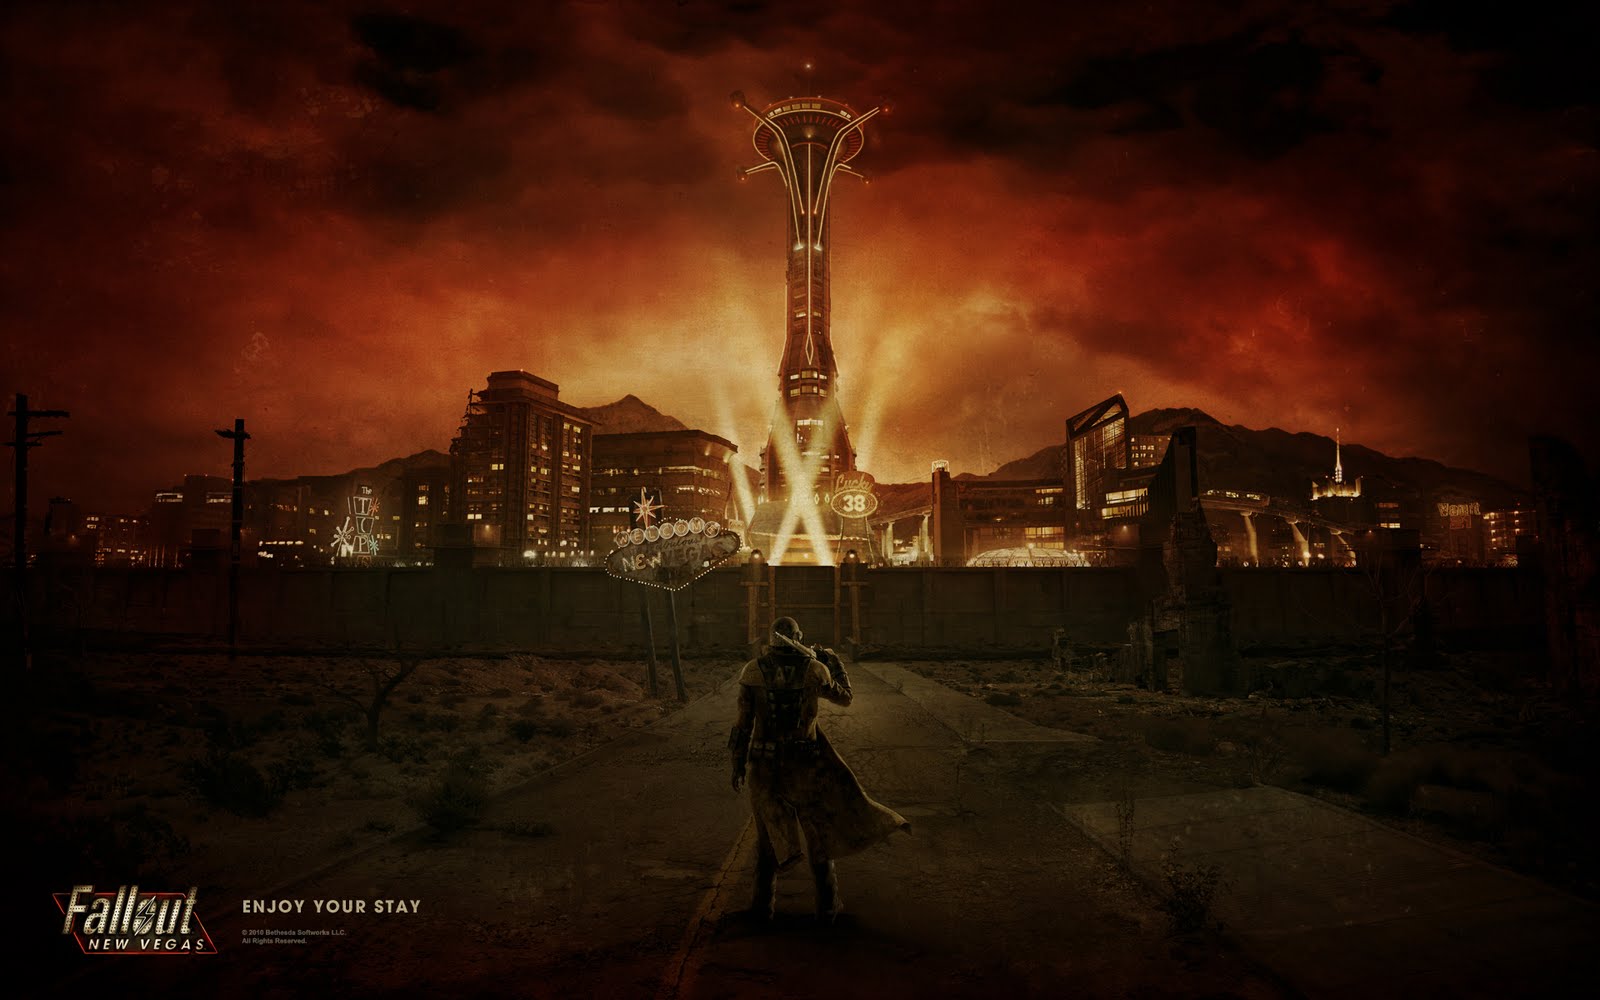 fallout new vegas wallpaper hd,sky,darkness,pc game,digital compositing,photography